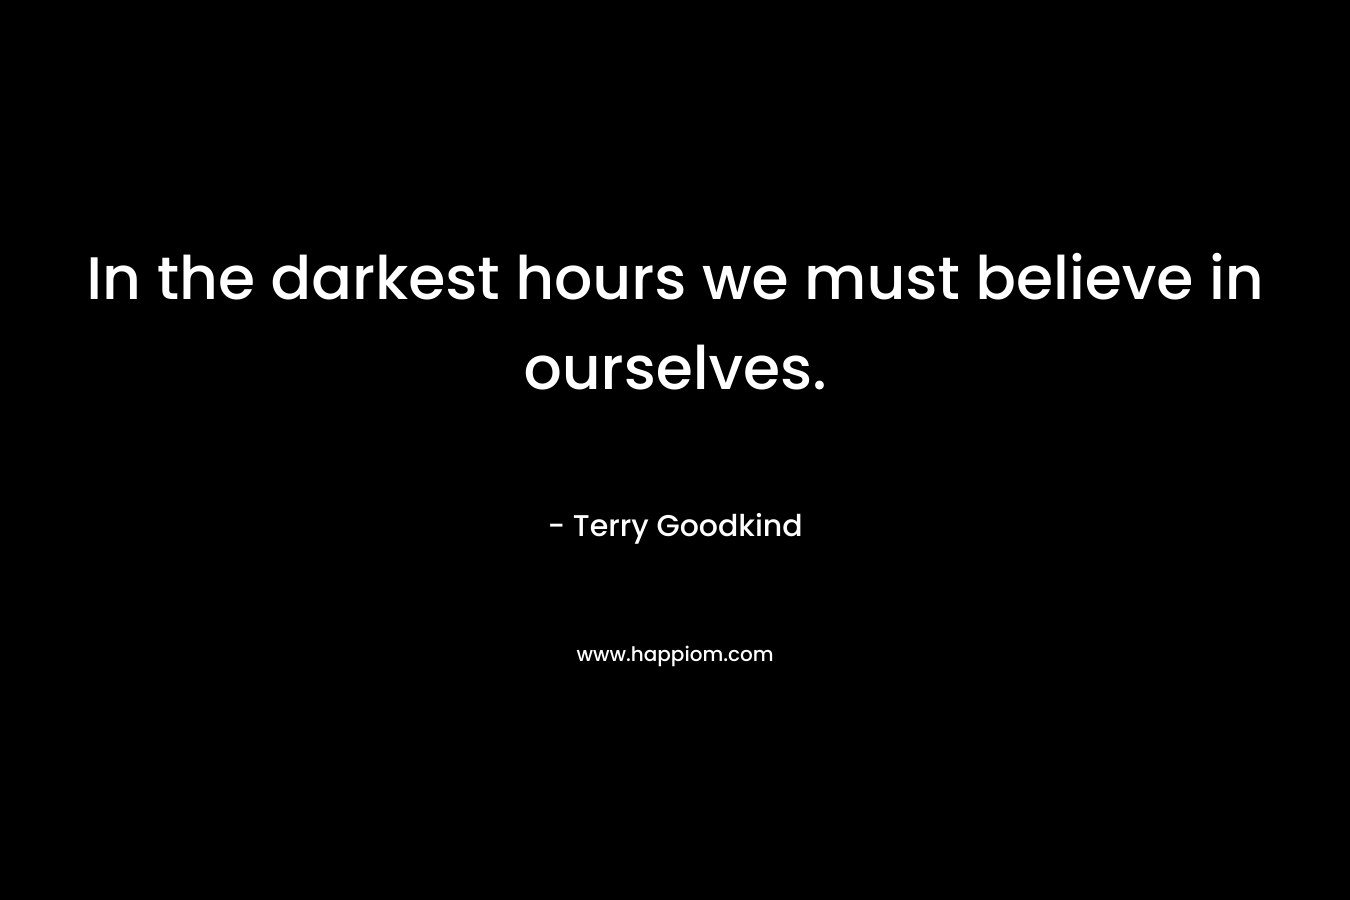 In the darkest hours we must believe in ourselves. – Terry Goodkind